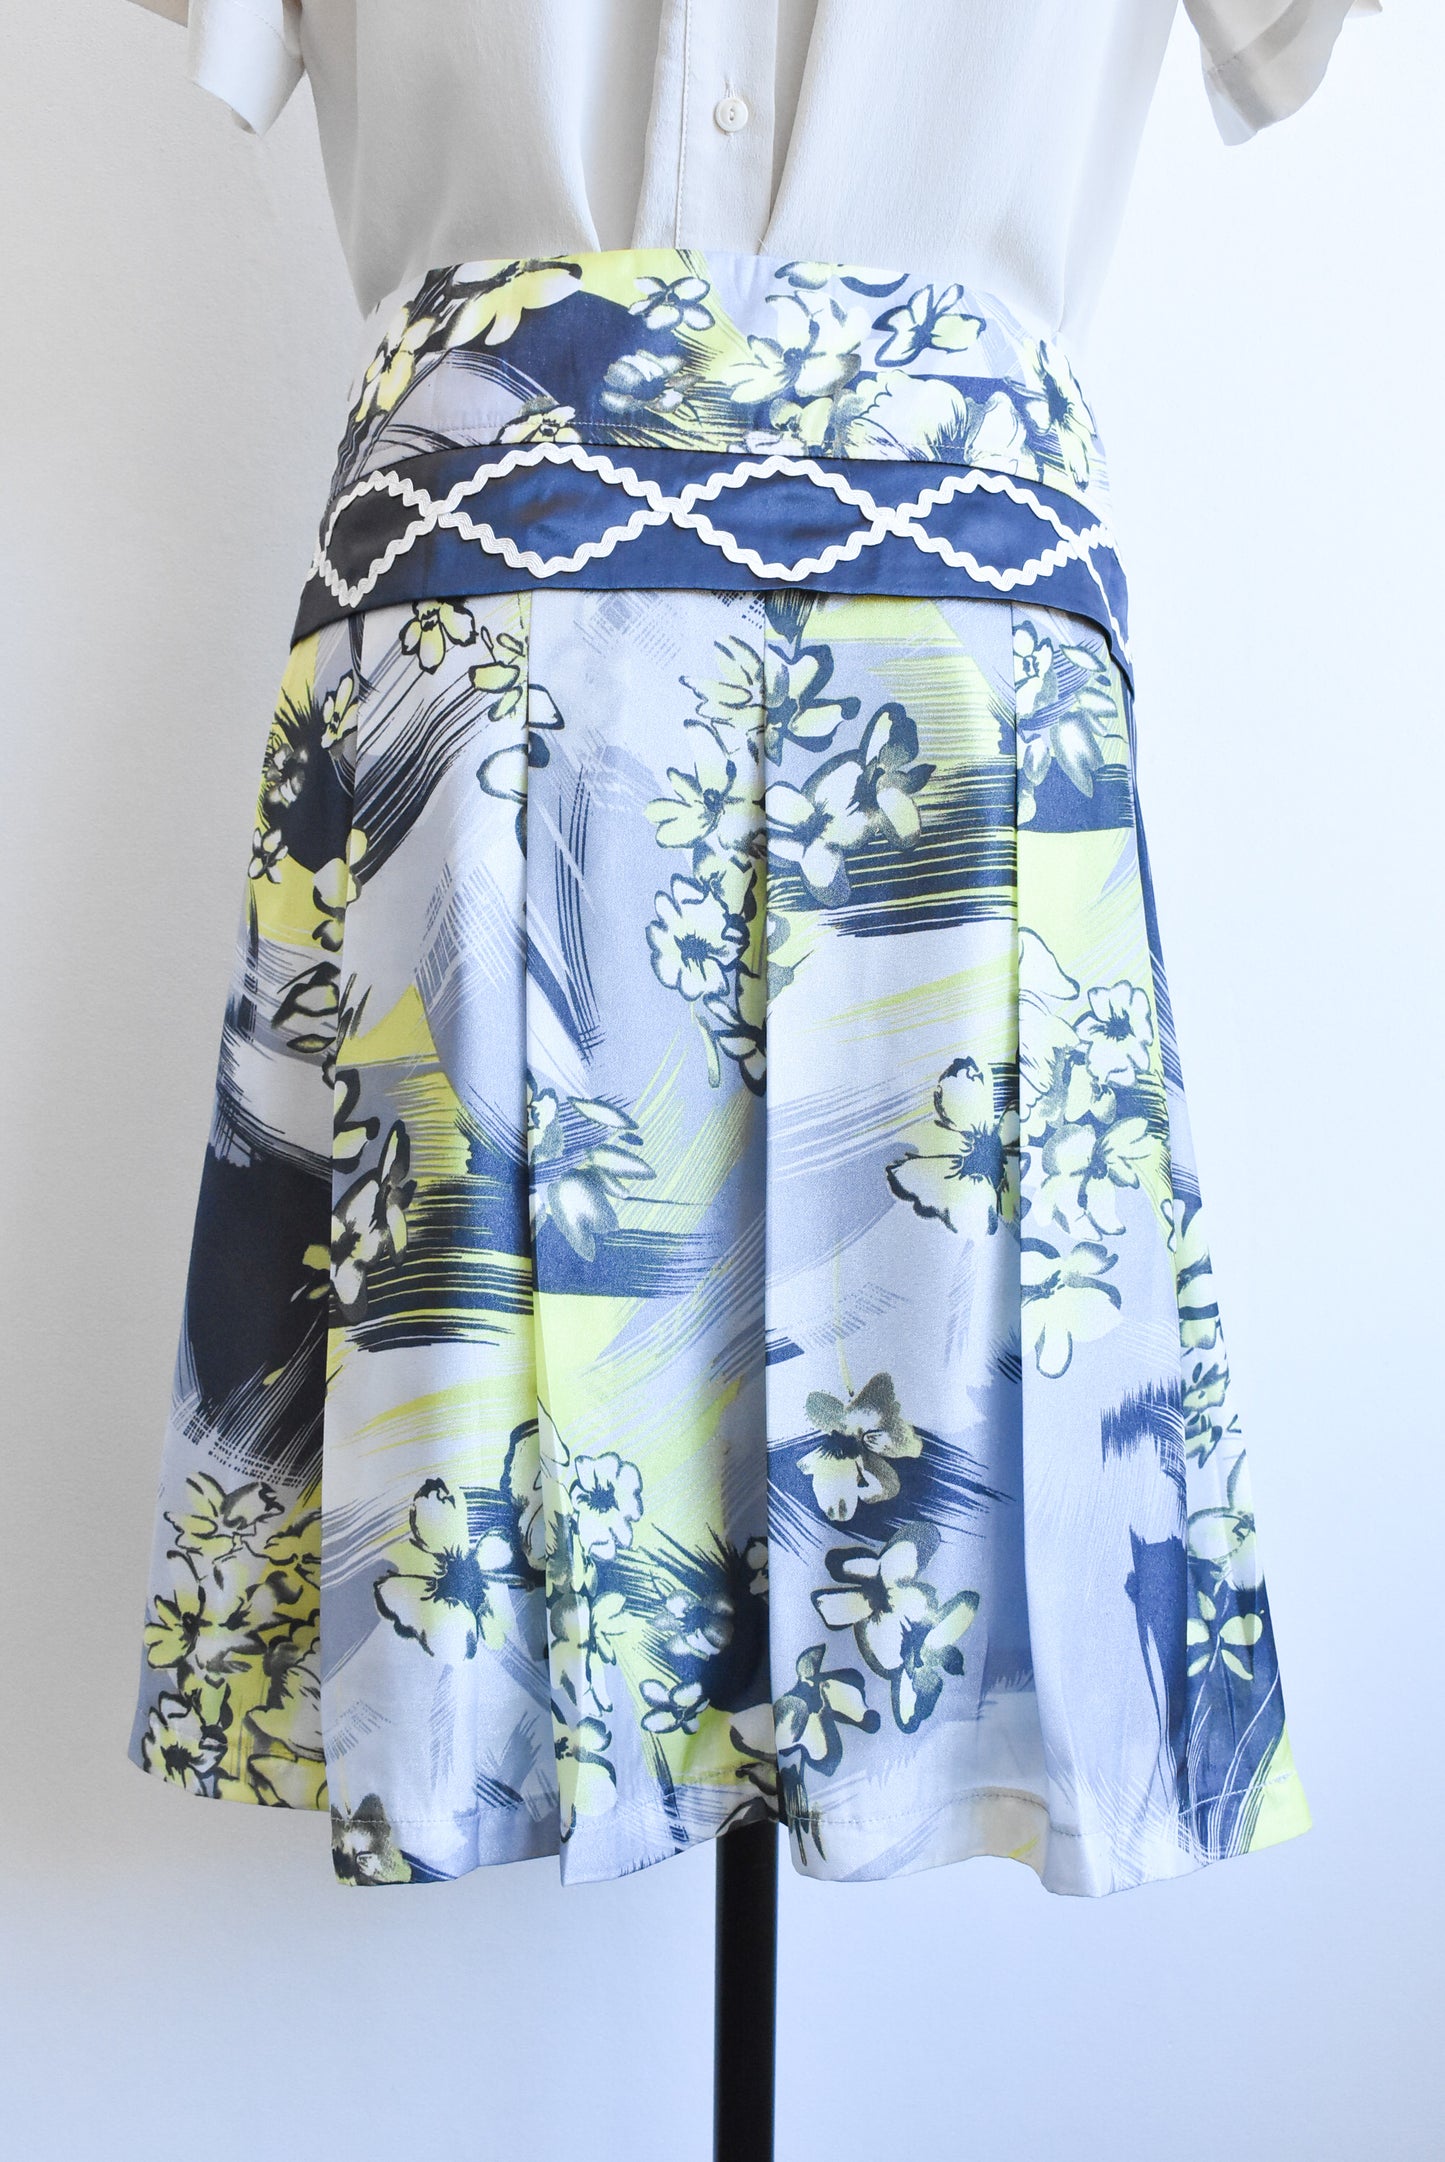 Farinelli acid yellow and silver floral pleated skirt, size L